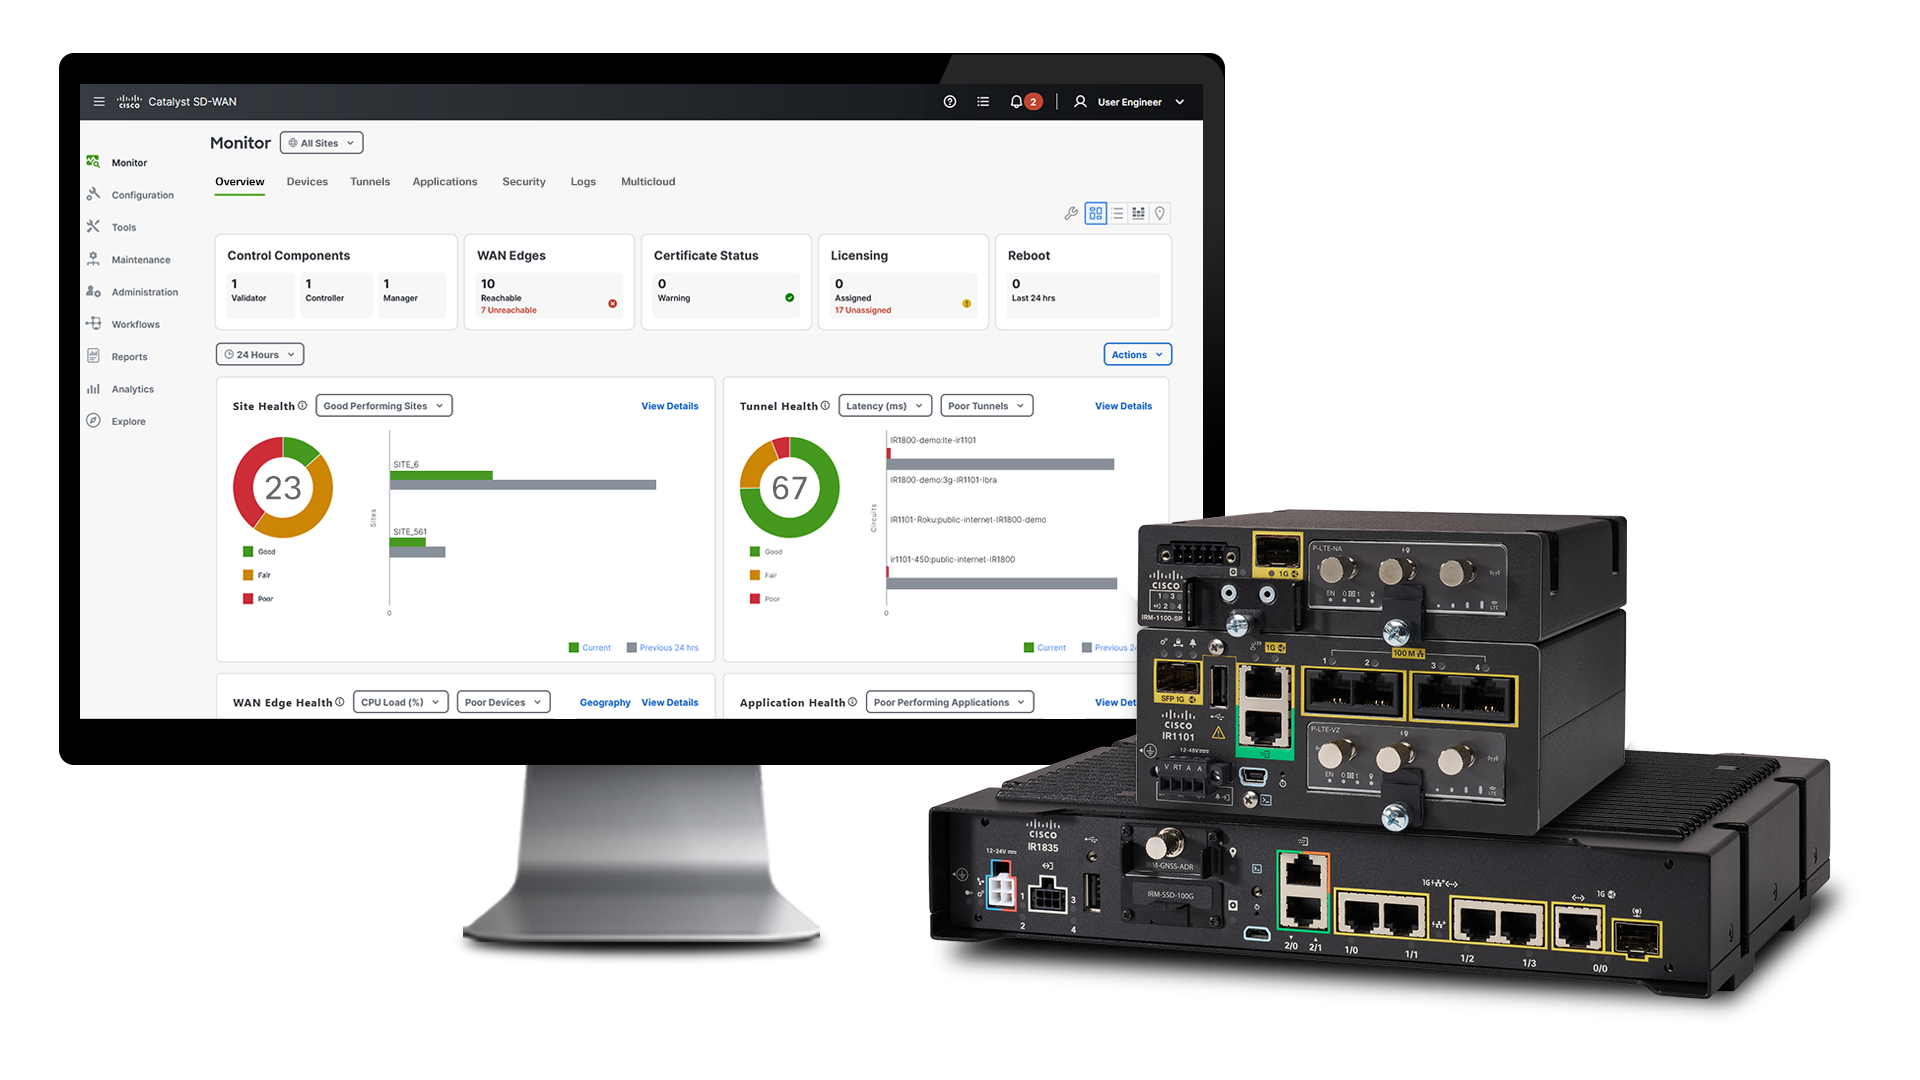 Catalyst IR1100 Rugged Series Routers, Catalyst IR1800 Rugged Series Routers, and Cisco SD-WAN interface